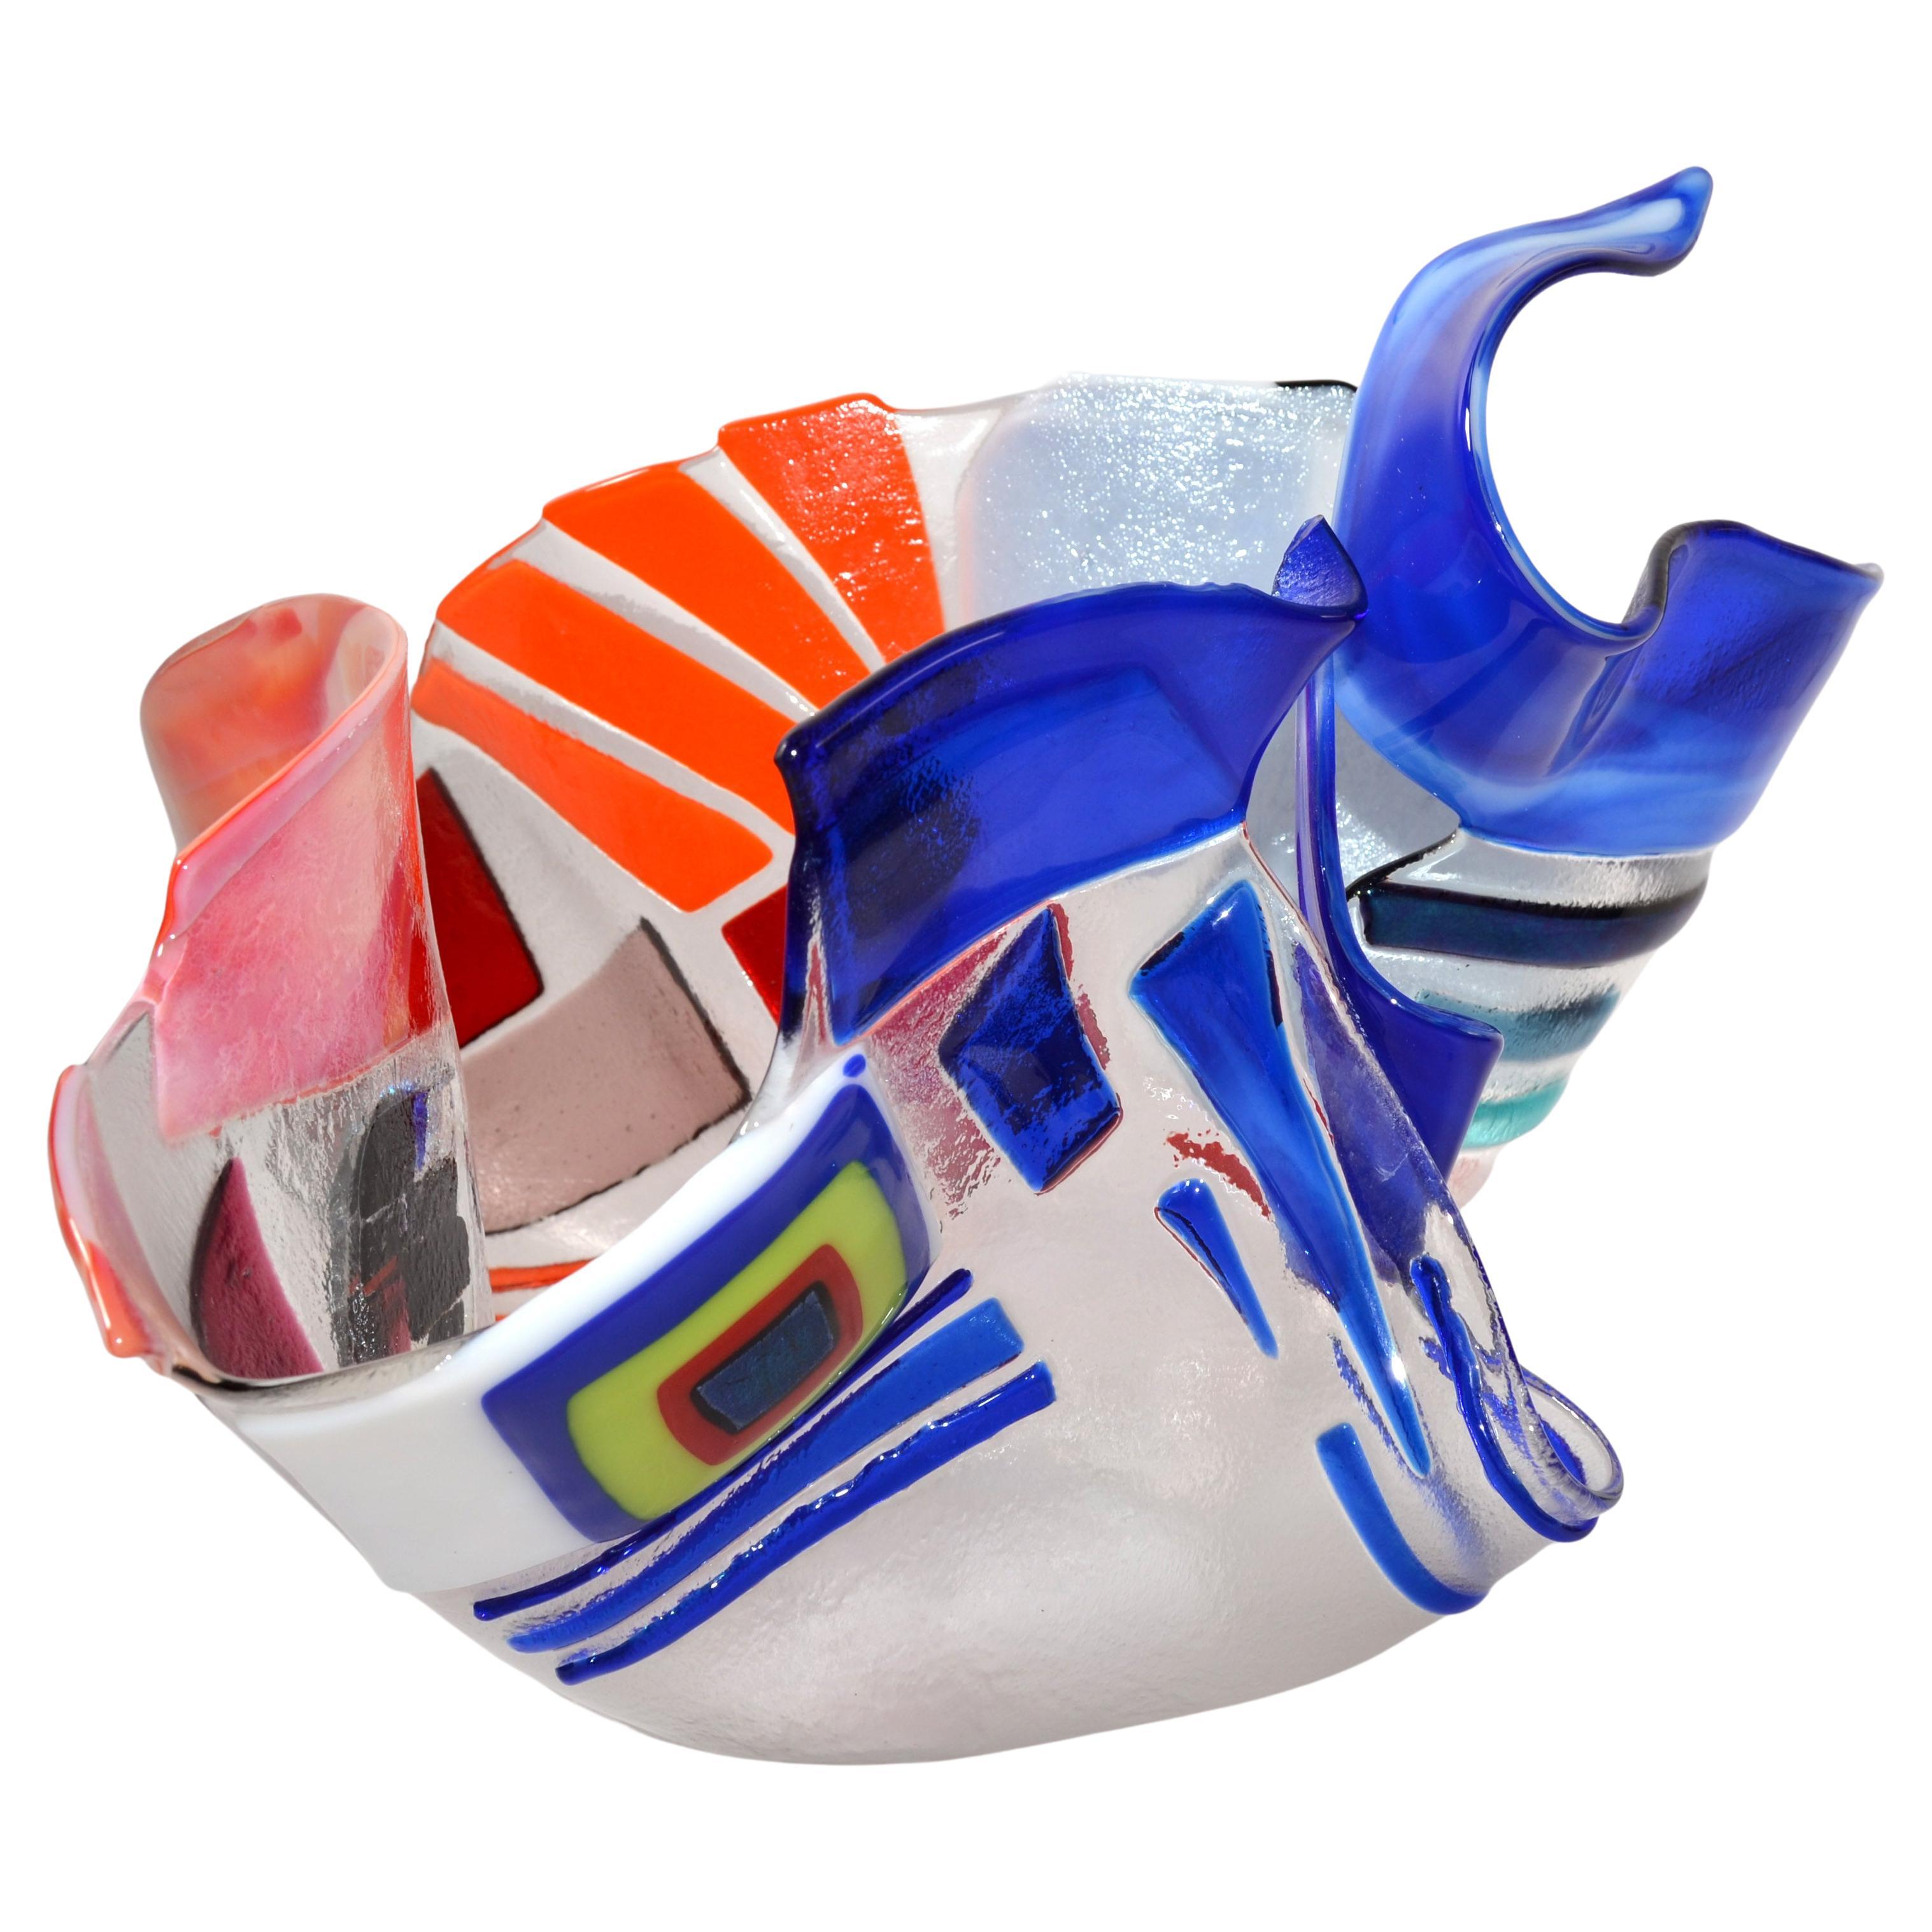 Signed freeform vintage blown Art Glass bowl Studio Piece with hand-painted Enamel patches, shapes and forms.
Pop Art from the 1980s. Looks amazing from every different angle. Signed by Artist Josephina.
This bowl is perfect on display or used as